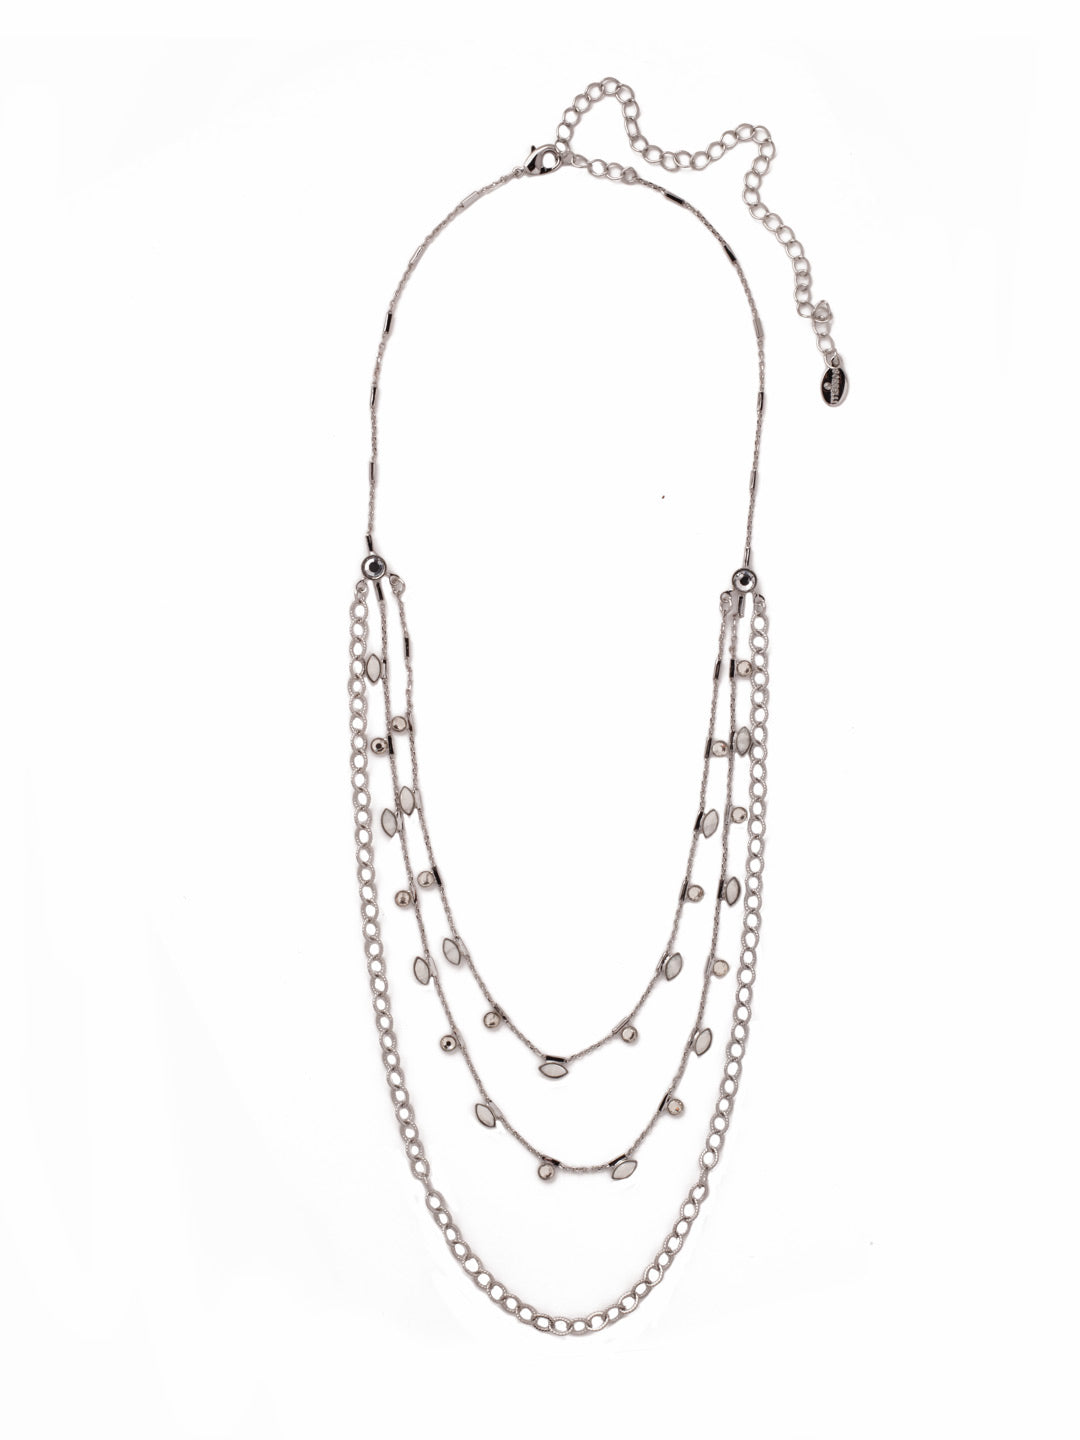 Somer Layered Necklace - NEV7PDCRY - <p>Put on the Somer Layered Necklace for a light and airy piece that combines metallic chainlink and layers of dotted Sorrelli crystals, too. It's all you need to take any outfit to the next level. From Sorrelli's Crystal collection in our Palladium finish.</p>